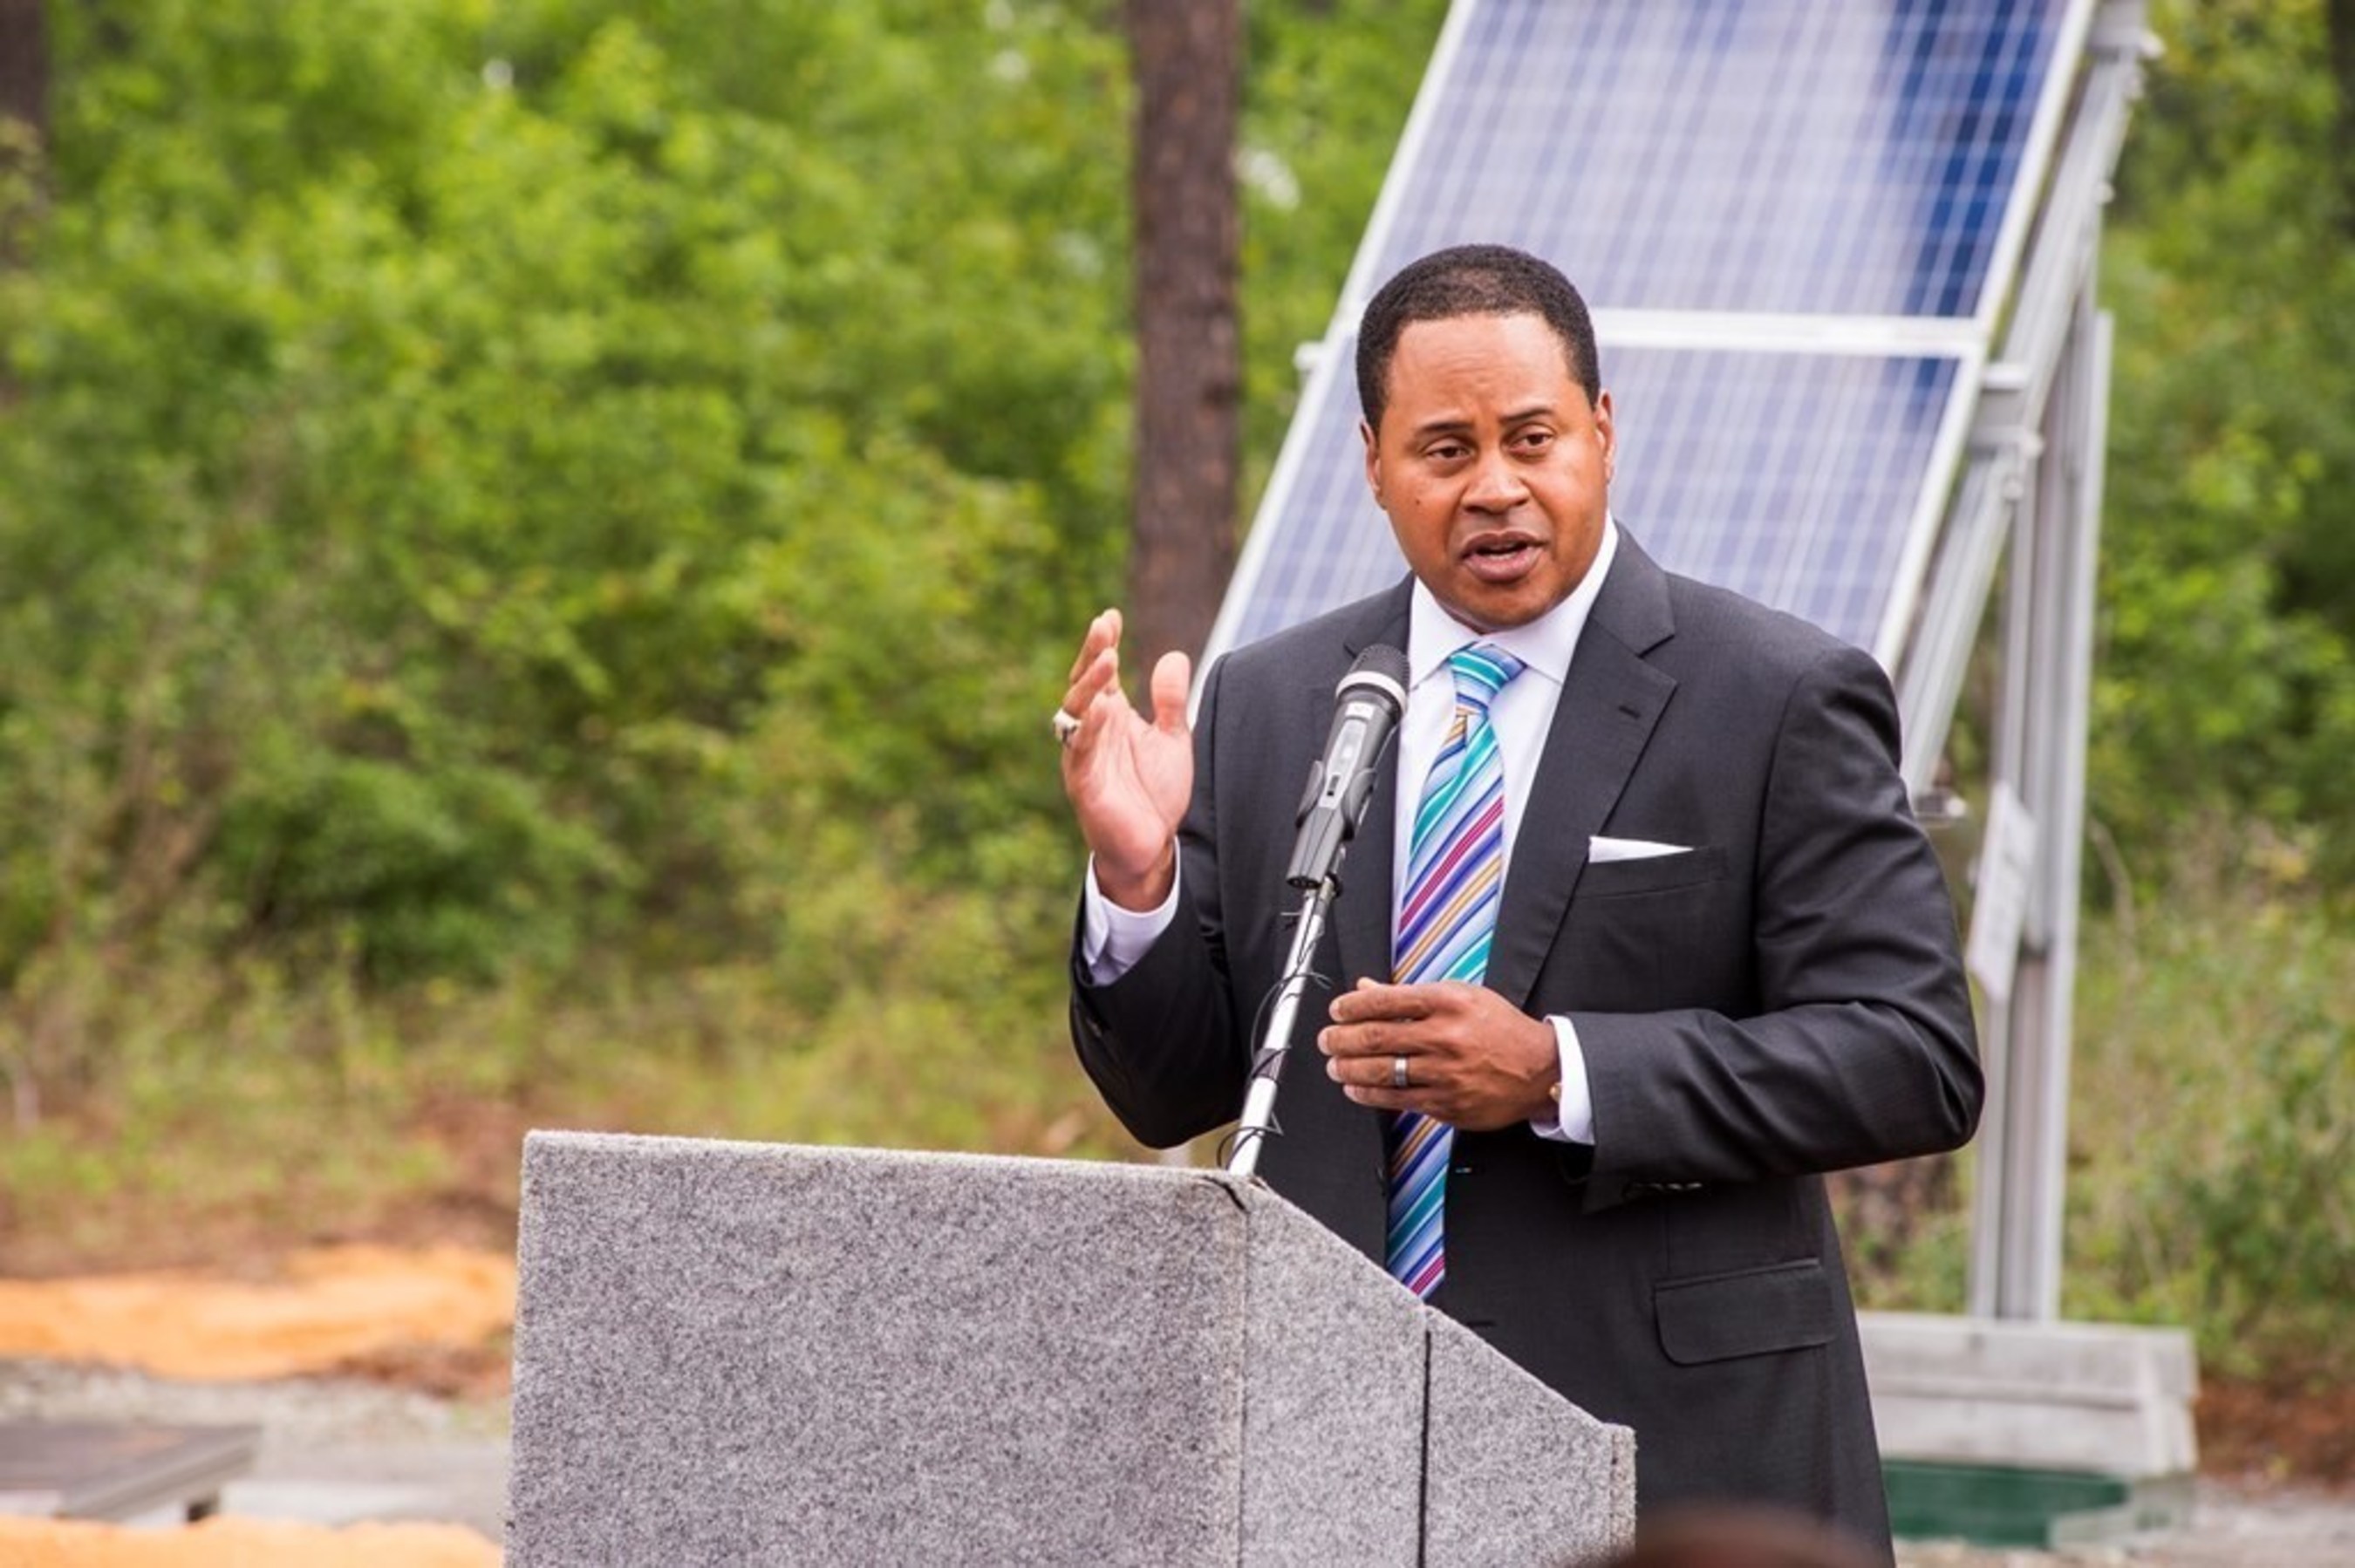 Georgia Power's Kenny Coleman speaks about the importance of solar generation and the new project at MCLB Albany to the company and customers.